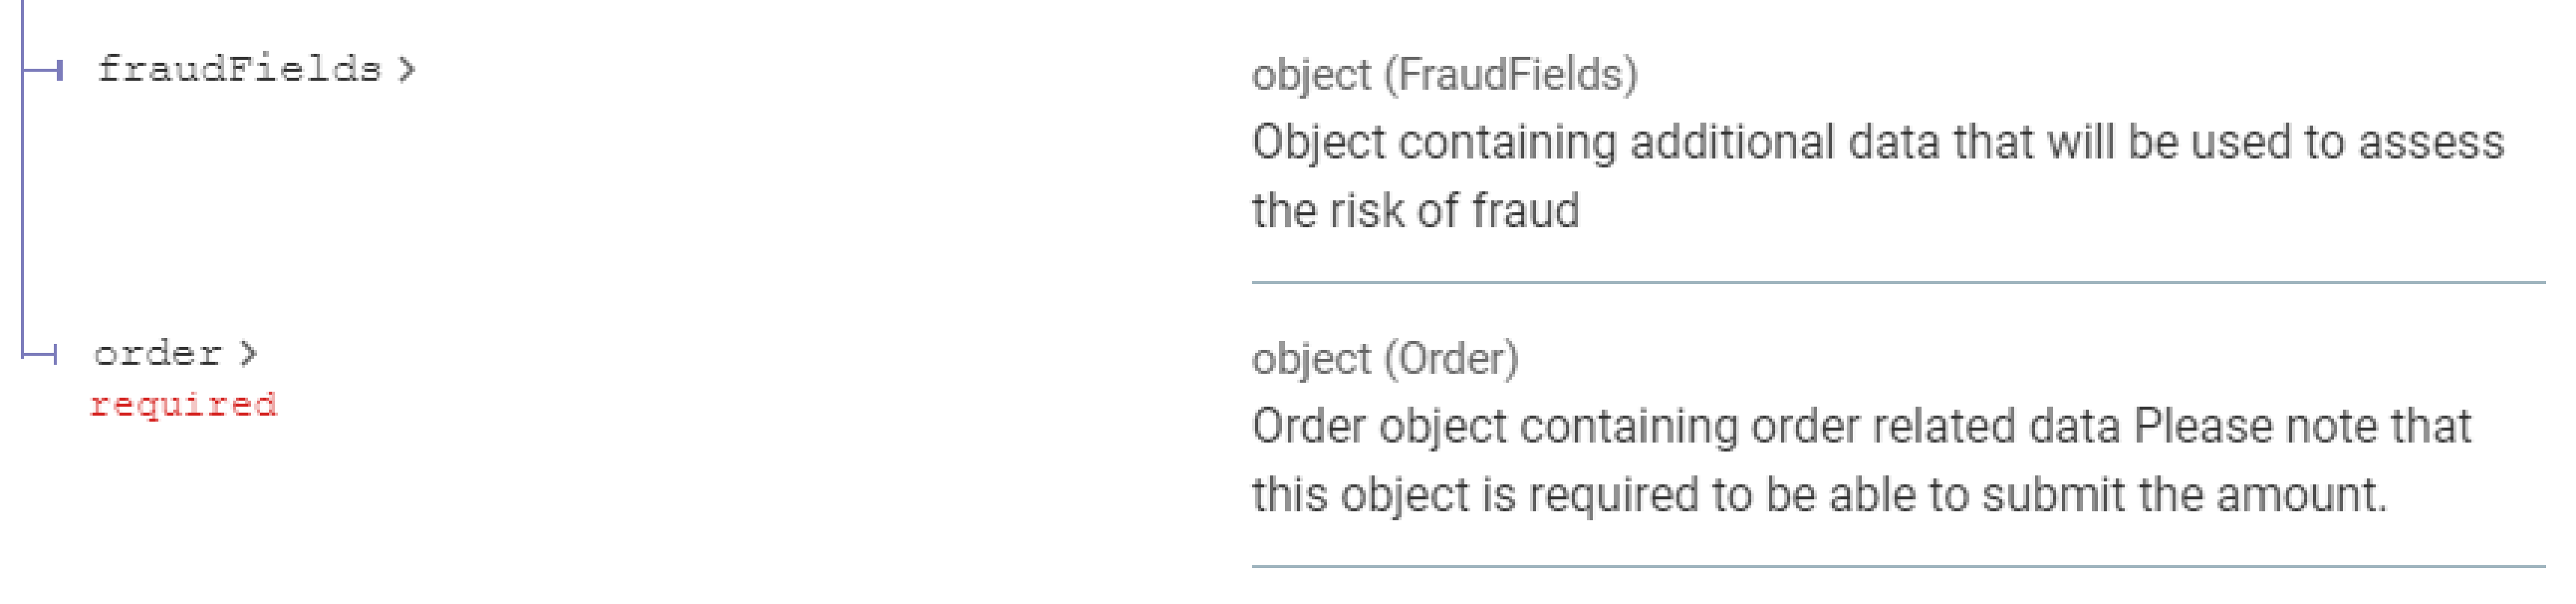 The image above shows the "order" property in the API reference marked as a required property